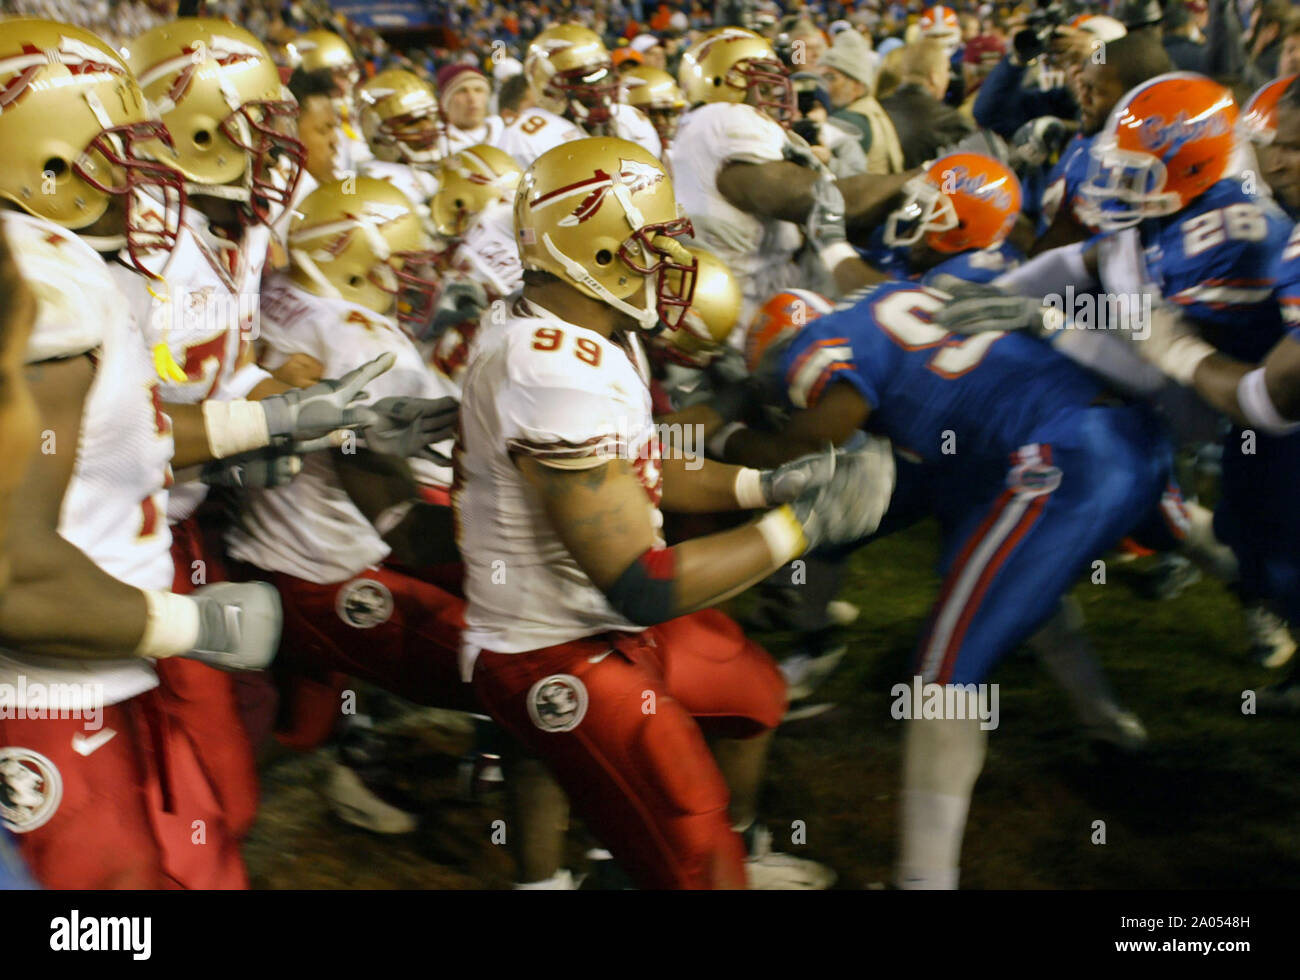 Members of the Florida and Florida State football teams, including Florida State's Travis Johnson (#99), center, fight following the Seminole's 38-34 victory over the Gators Saturday, November 29, 2003. Stock Photo